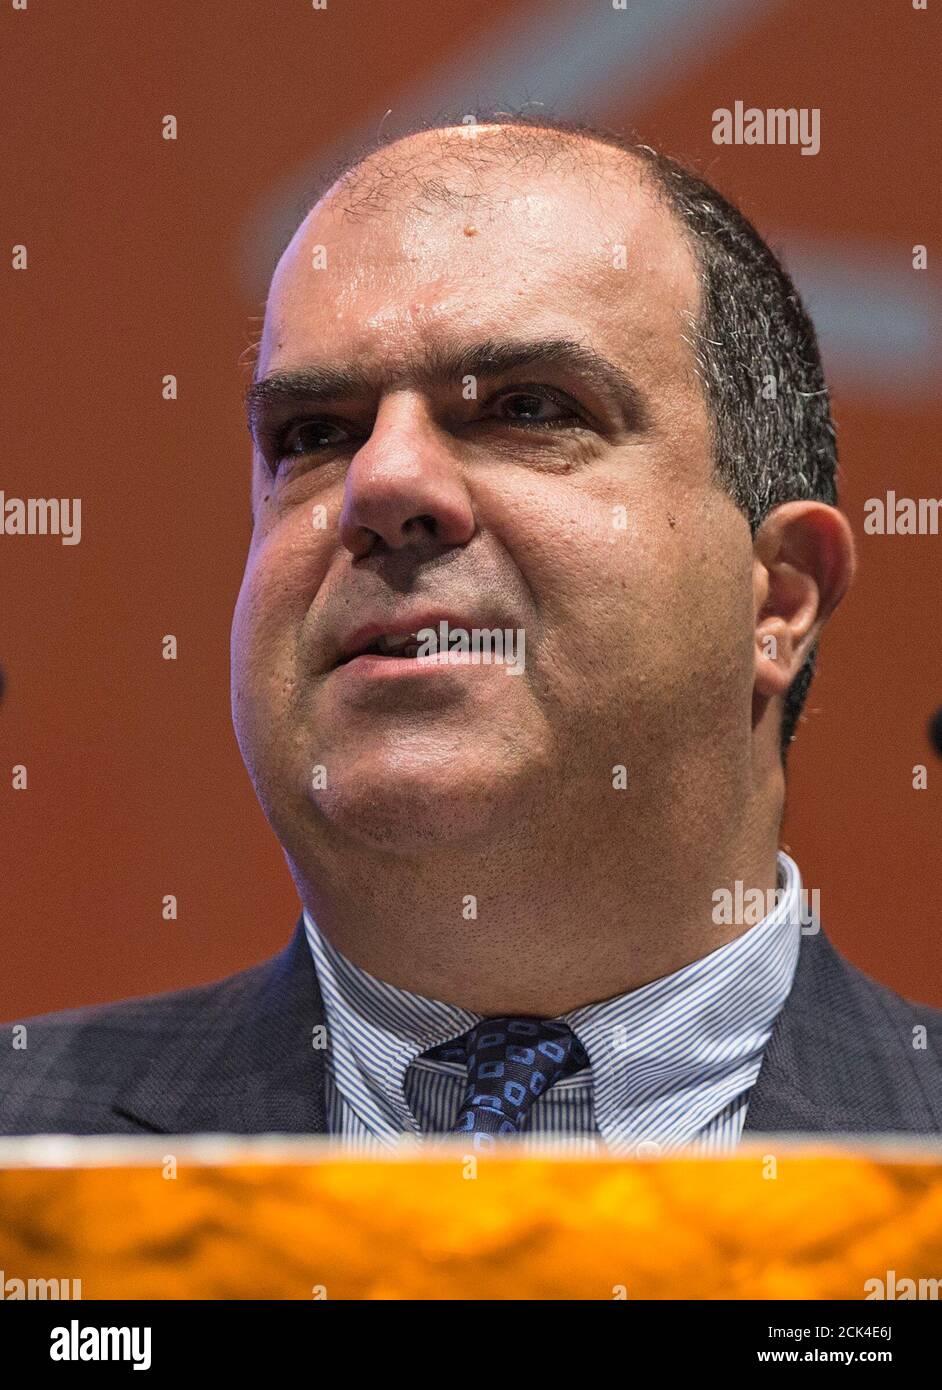 Easyjet founder Stelios Haji-Ioannou speaks at a media event to celebrate 20 years in business at Luton Airport, southern England, November 10, 2015. British low cost carrier easyJet said it would launch a loyalty scheme for its most frequent travelers, the latest perk to be added that is more usually associated with traditional airlines. At an event marking 20 years since its first flight on Tuesday, easyJet said it would reward customers who fly with it more than 20 times a year by offering them benefits such as flight changes for free.    REUTERS/Eddie Keogh Stock Photo